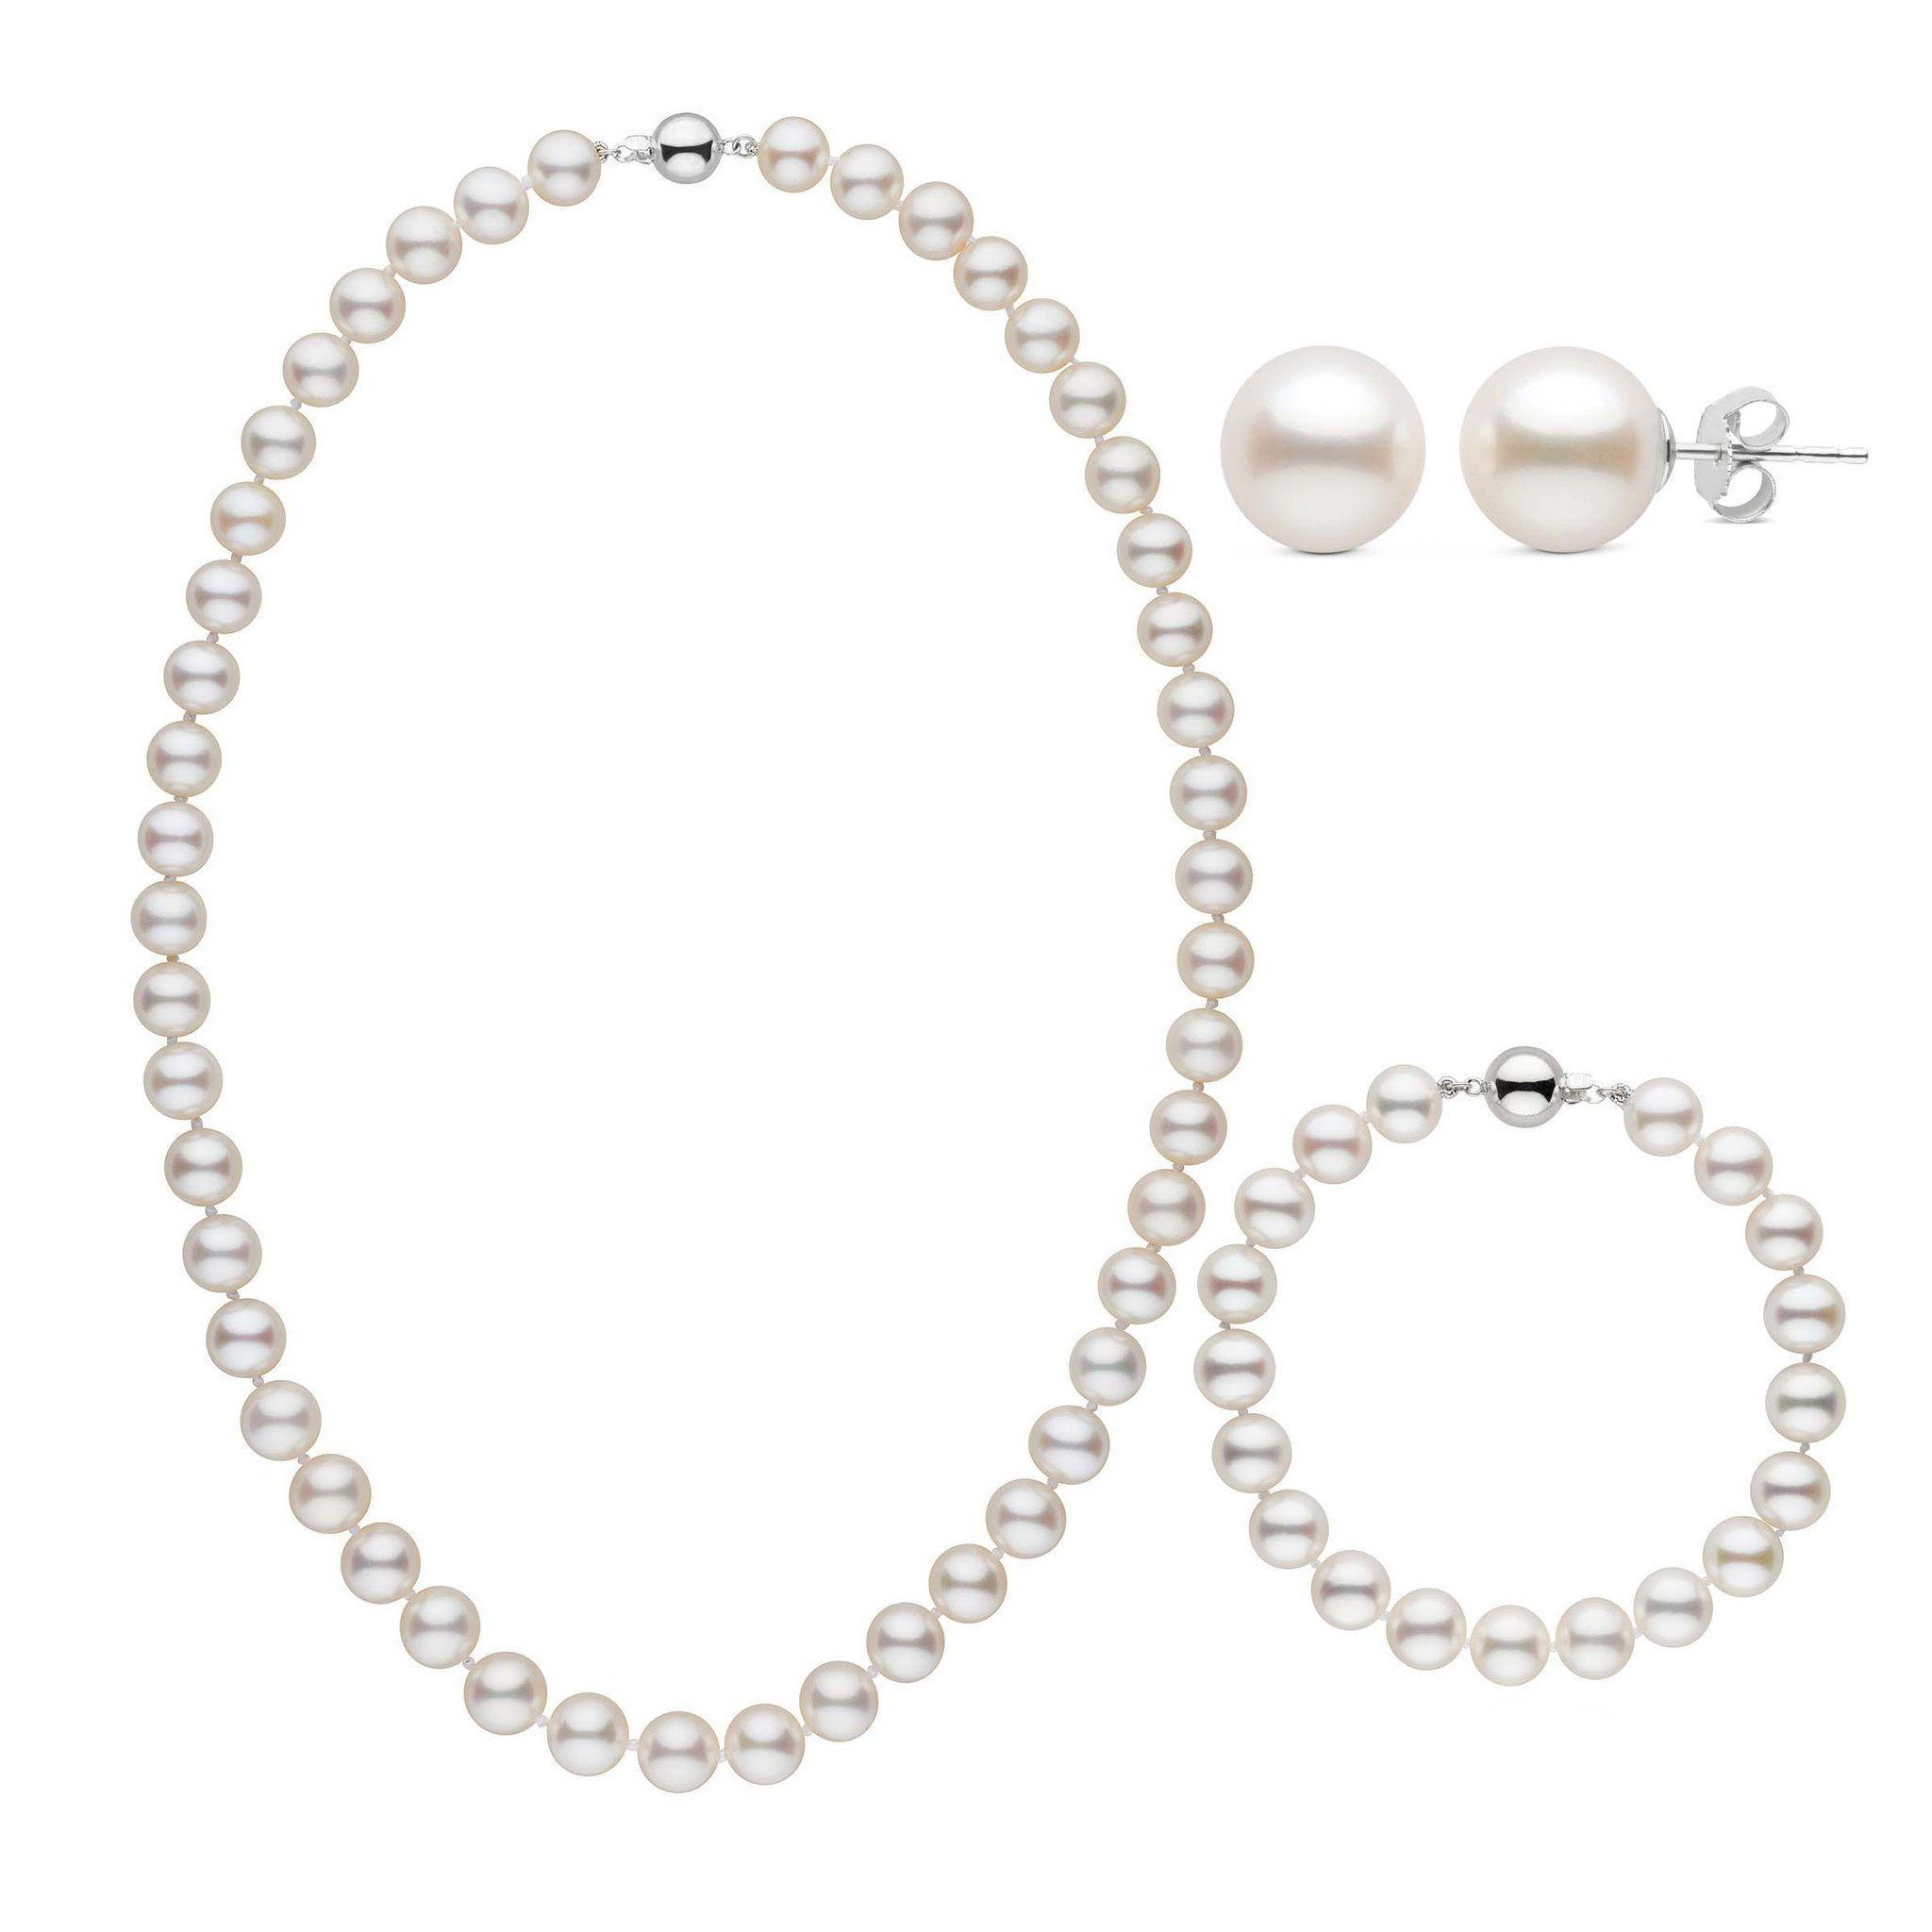 18 Inch 3 Piece Set of 8.5-9.0 mm AAA White Freshwater Pearls